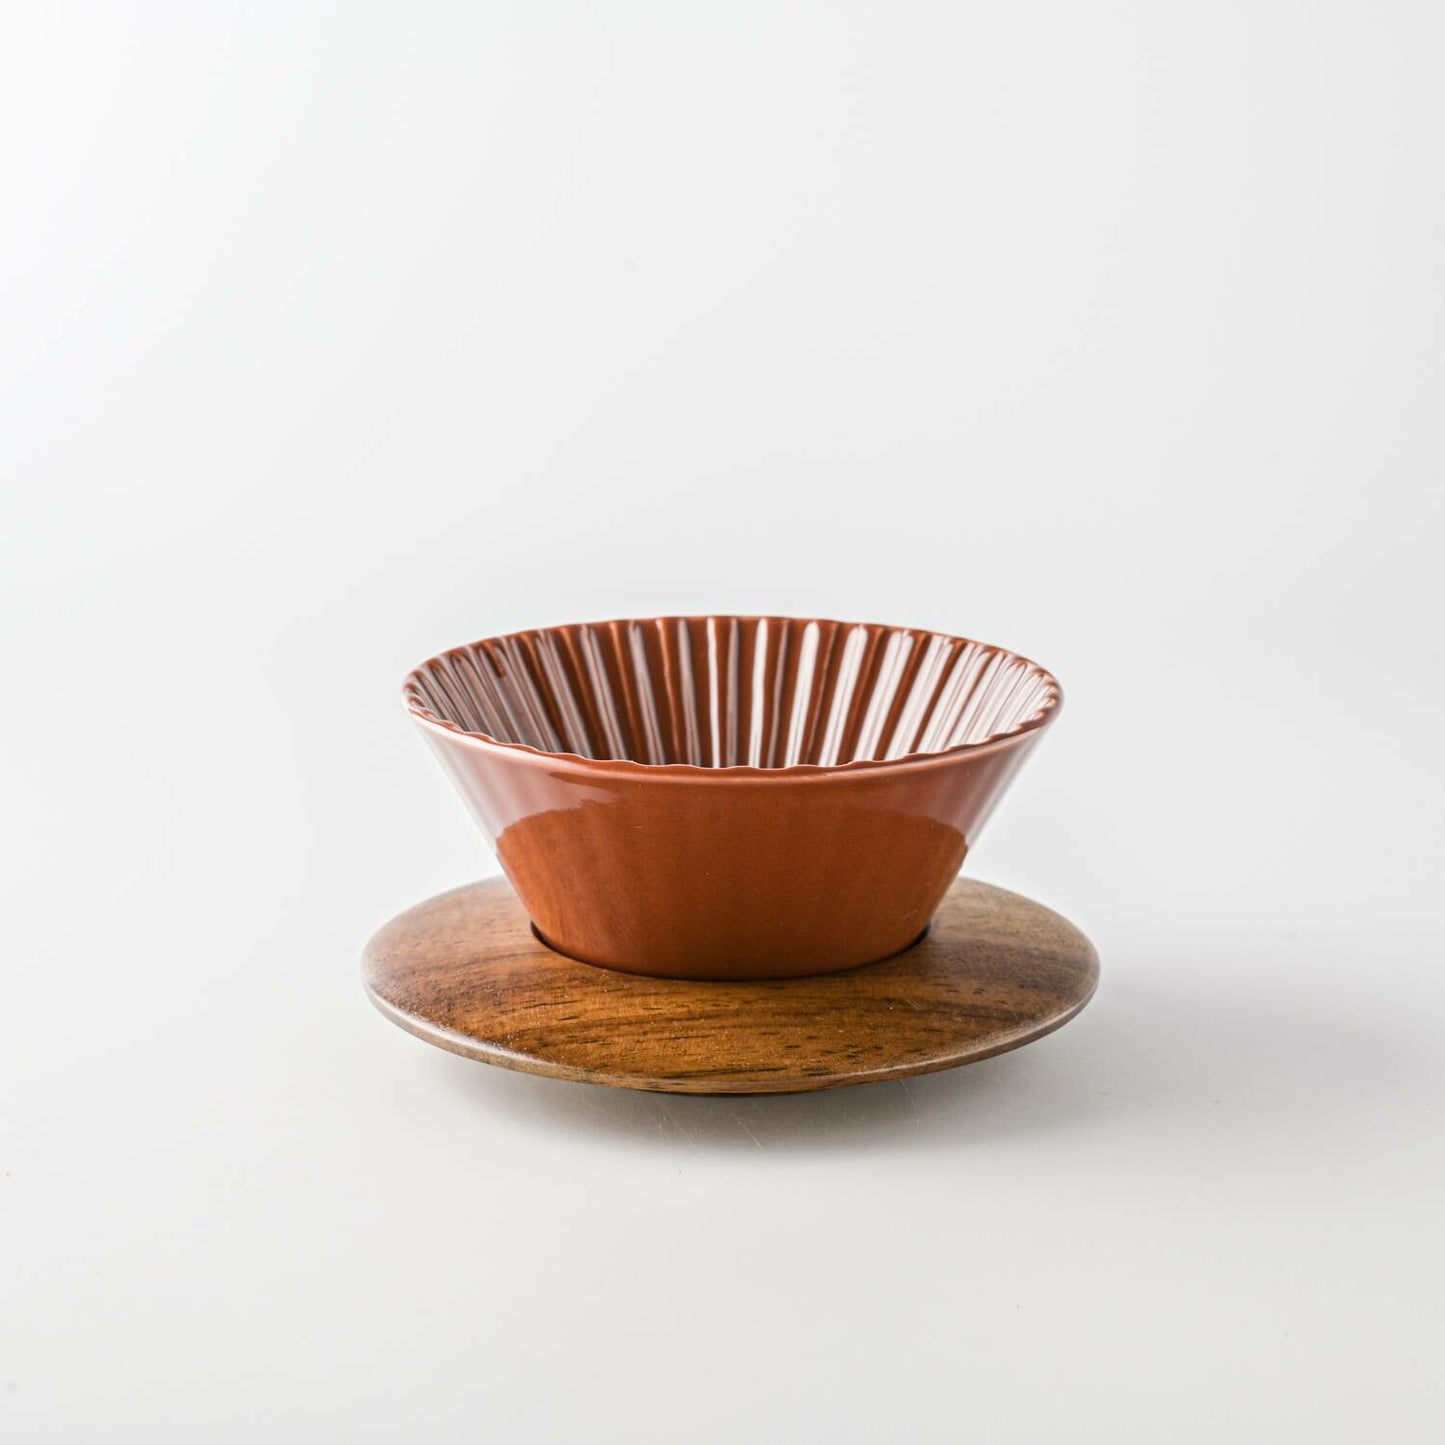 Ceramic filter cup with wooden coaster